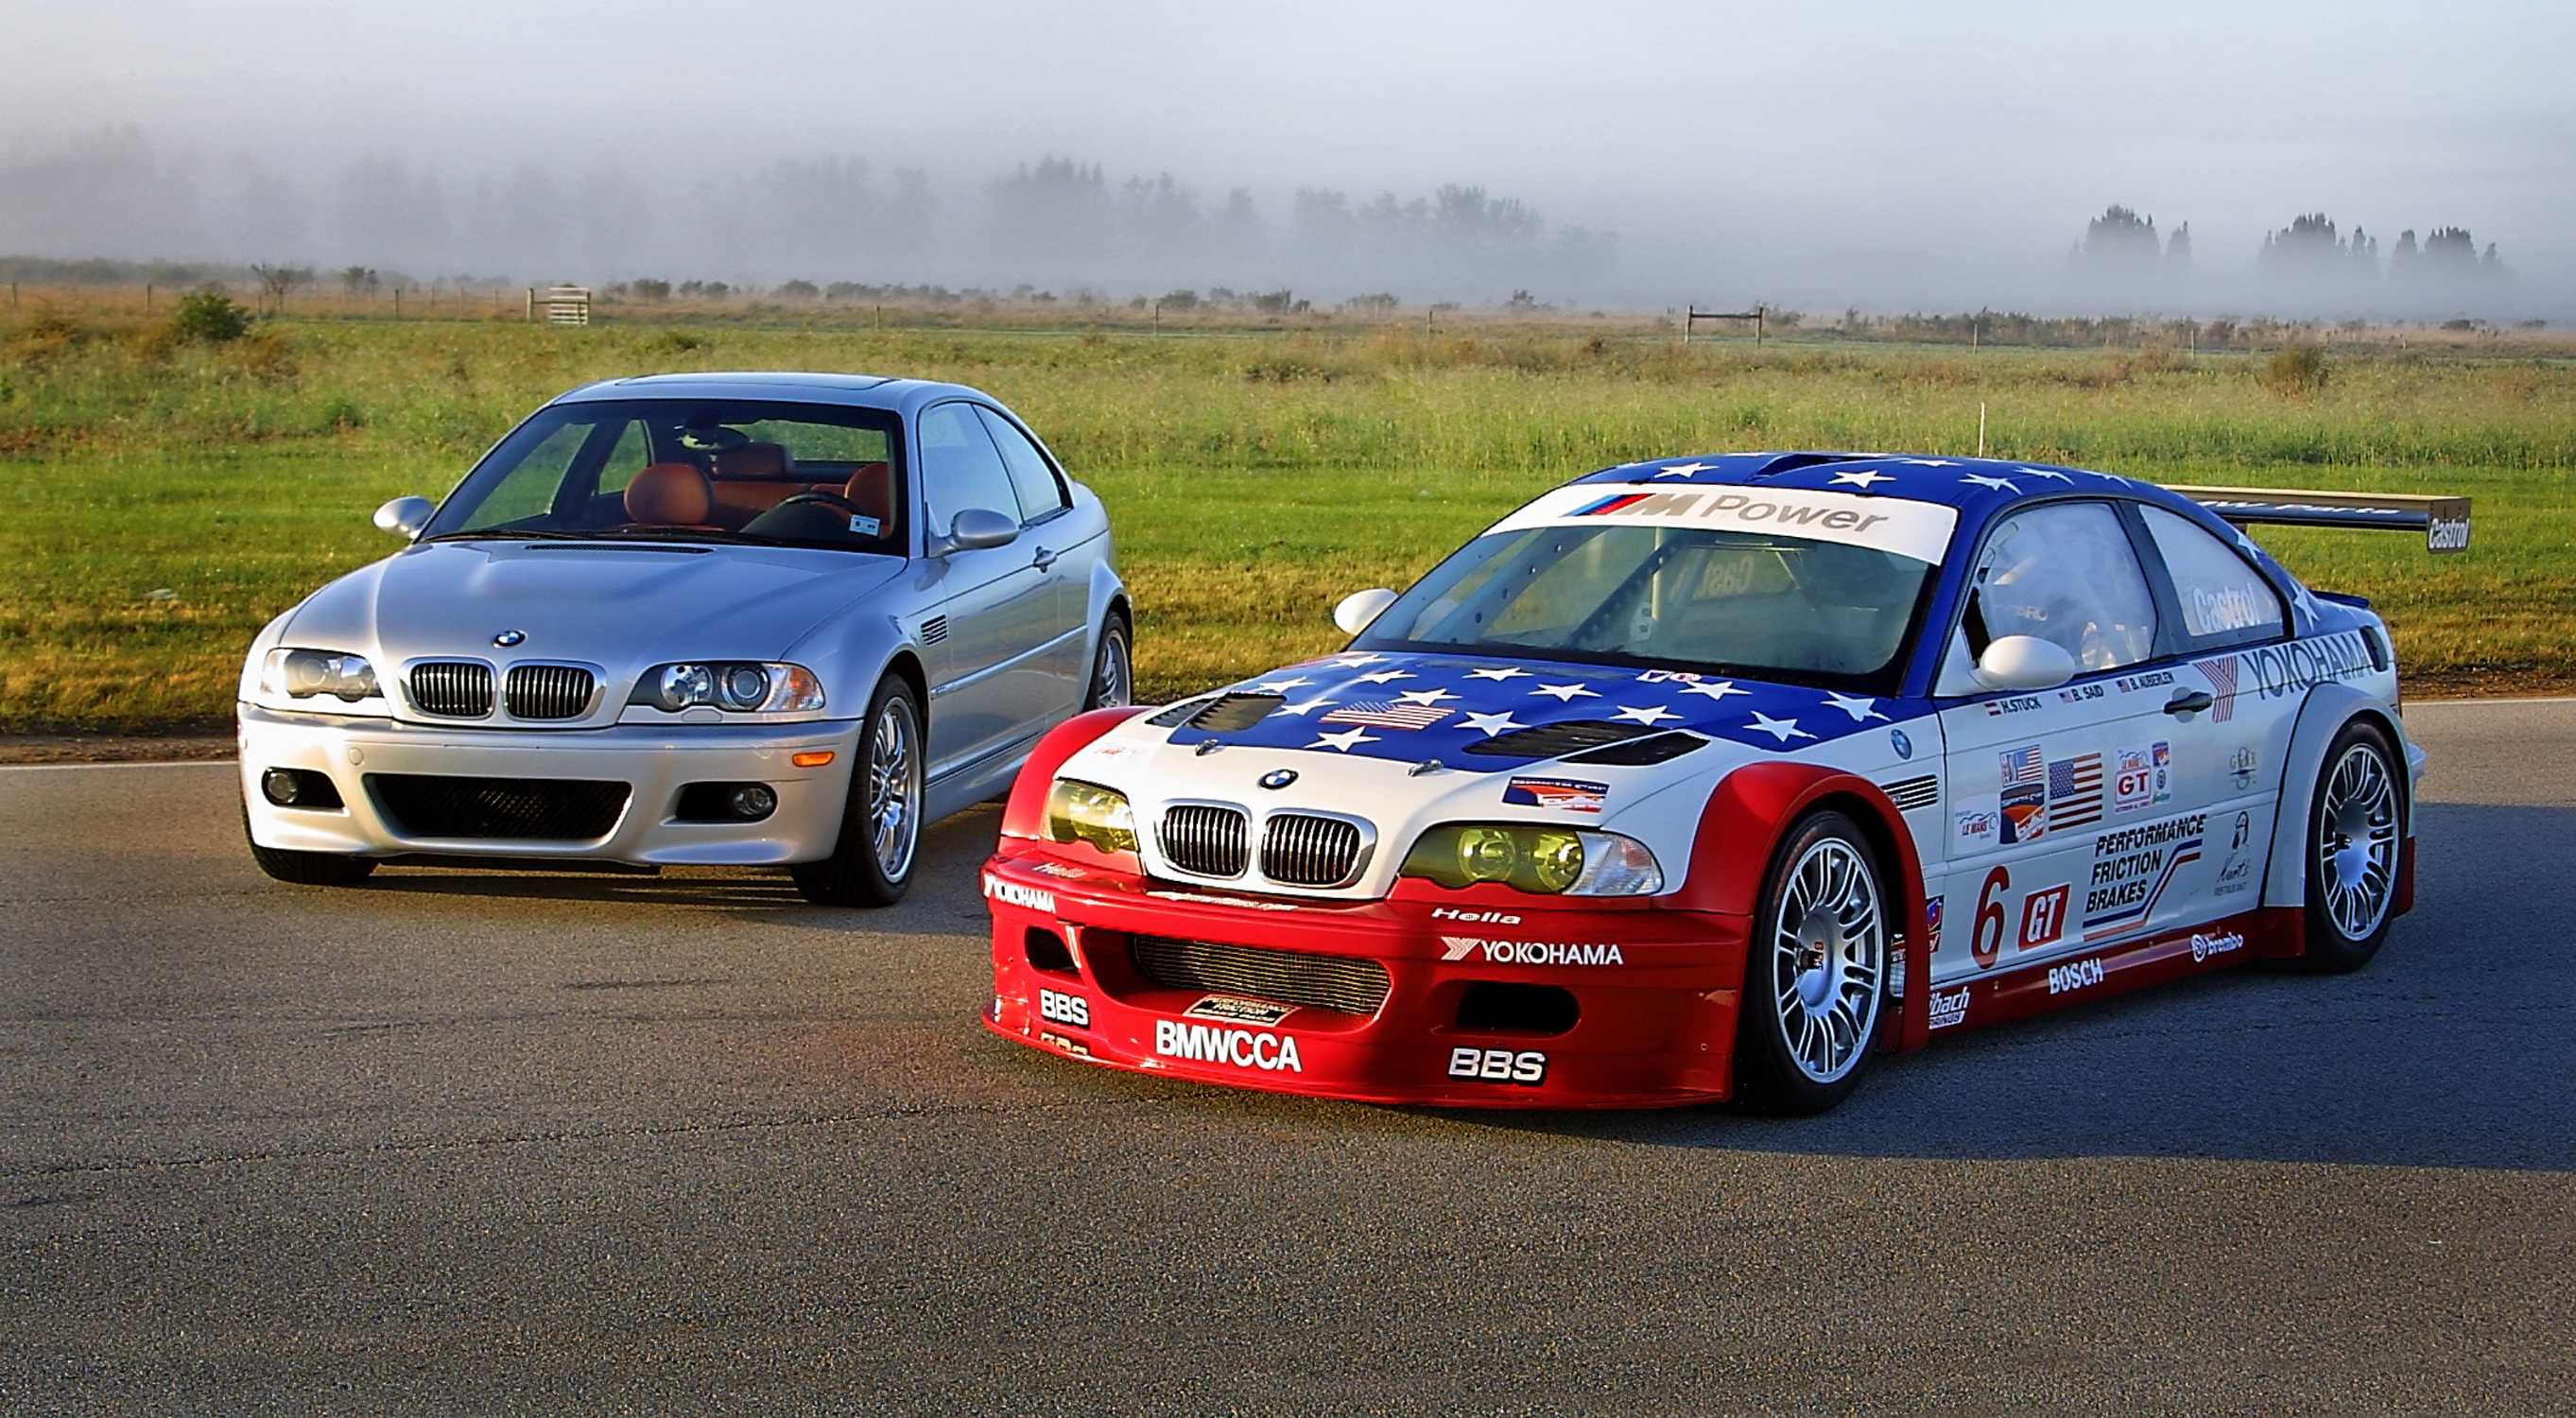 10 Reasons Why The E46 Is The Best BMW M3 Money Can Buy